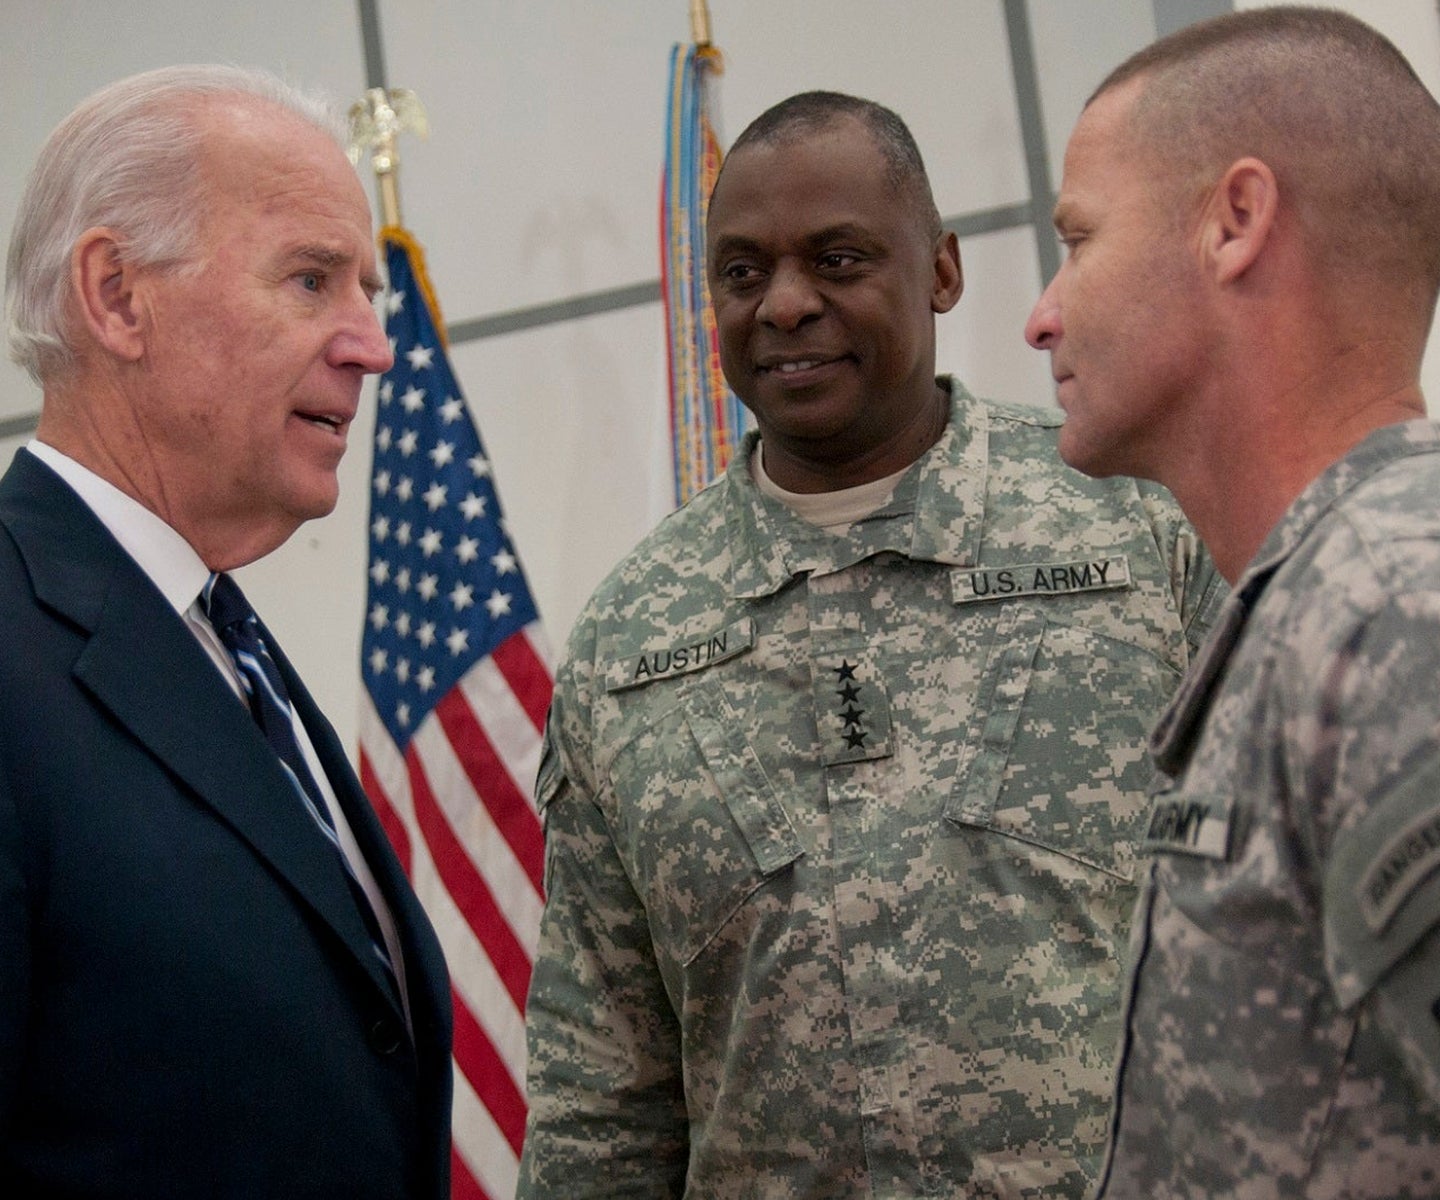 Vice President Joe Biden talks with United States Forces Iraq commander, Gen. Lloyd J. Austin III, and Command Sgt. Maj. Earl Rice of the 18th Airborne Corps, after unveiling the Medal of Commitment. Dec. 1, 2011, marks Iraq's Day of Commitment. The ceremony hosted by the Iraqi government at Al Faw Palace, in Baghdad, Iraq would be the last of it's kind as U.S. forces continue to draw out of Iraq. U.S. Vice President Joe Biden, took the opportunity to thank U.S. and Iraqi service members for all of their sacrifices that led to the end of an almost decade long war.